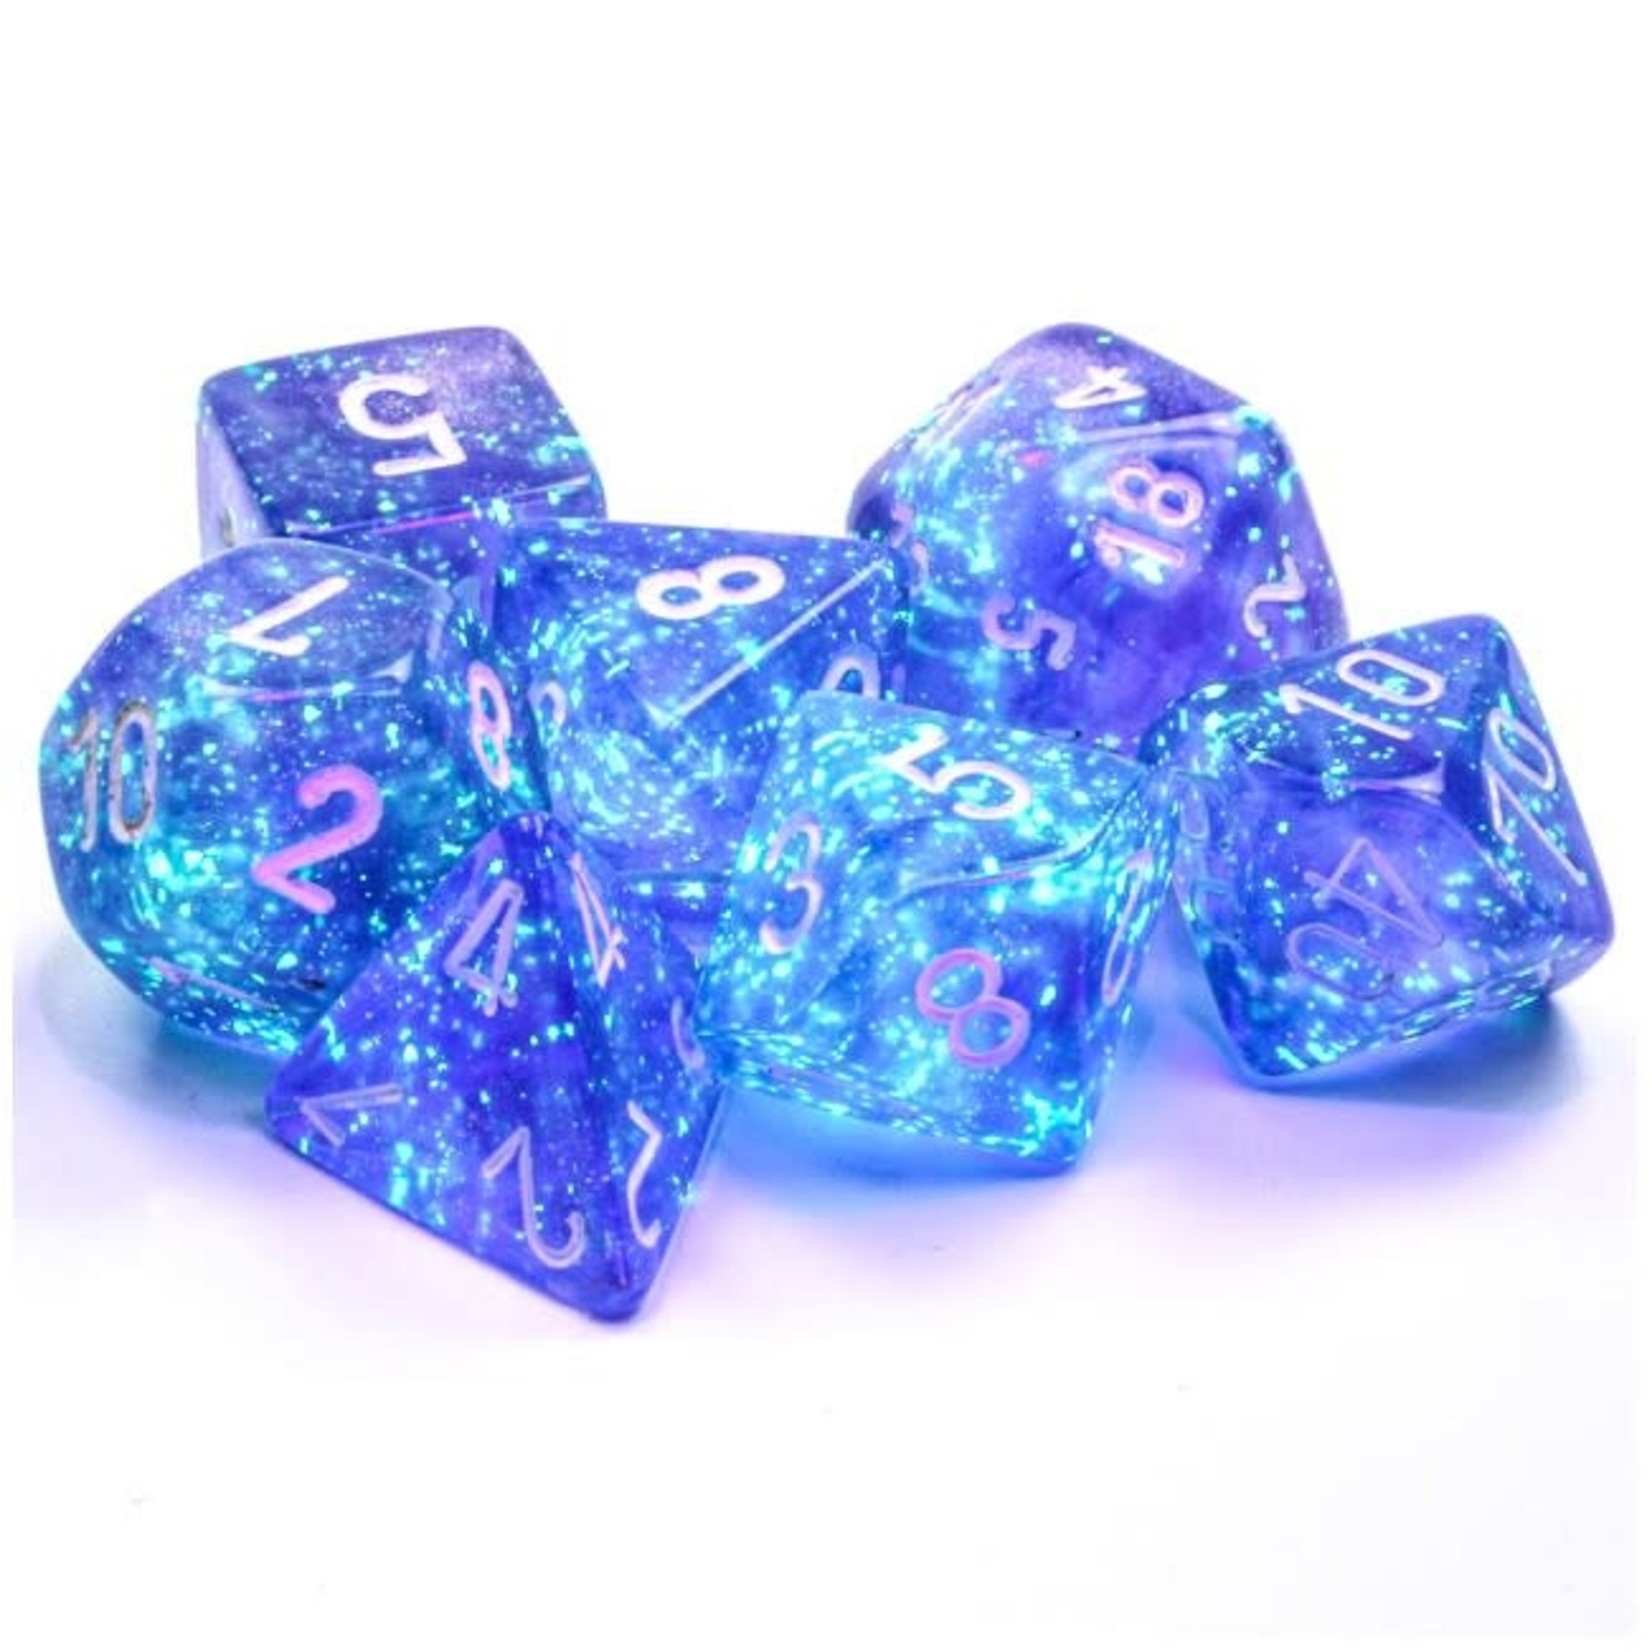 Chessex Chessex Borealis Purple with White Luminary Polyhedral 7 die set